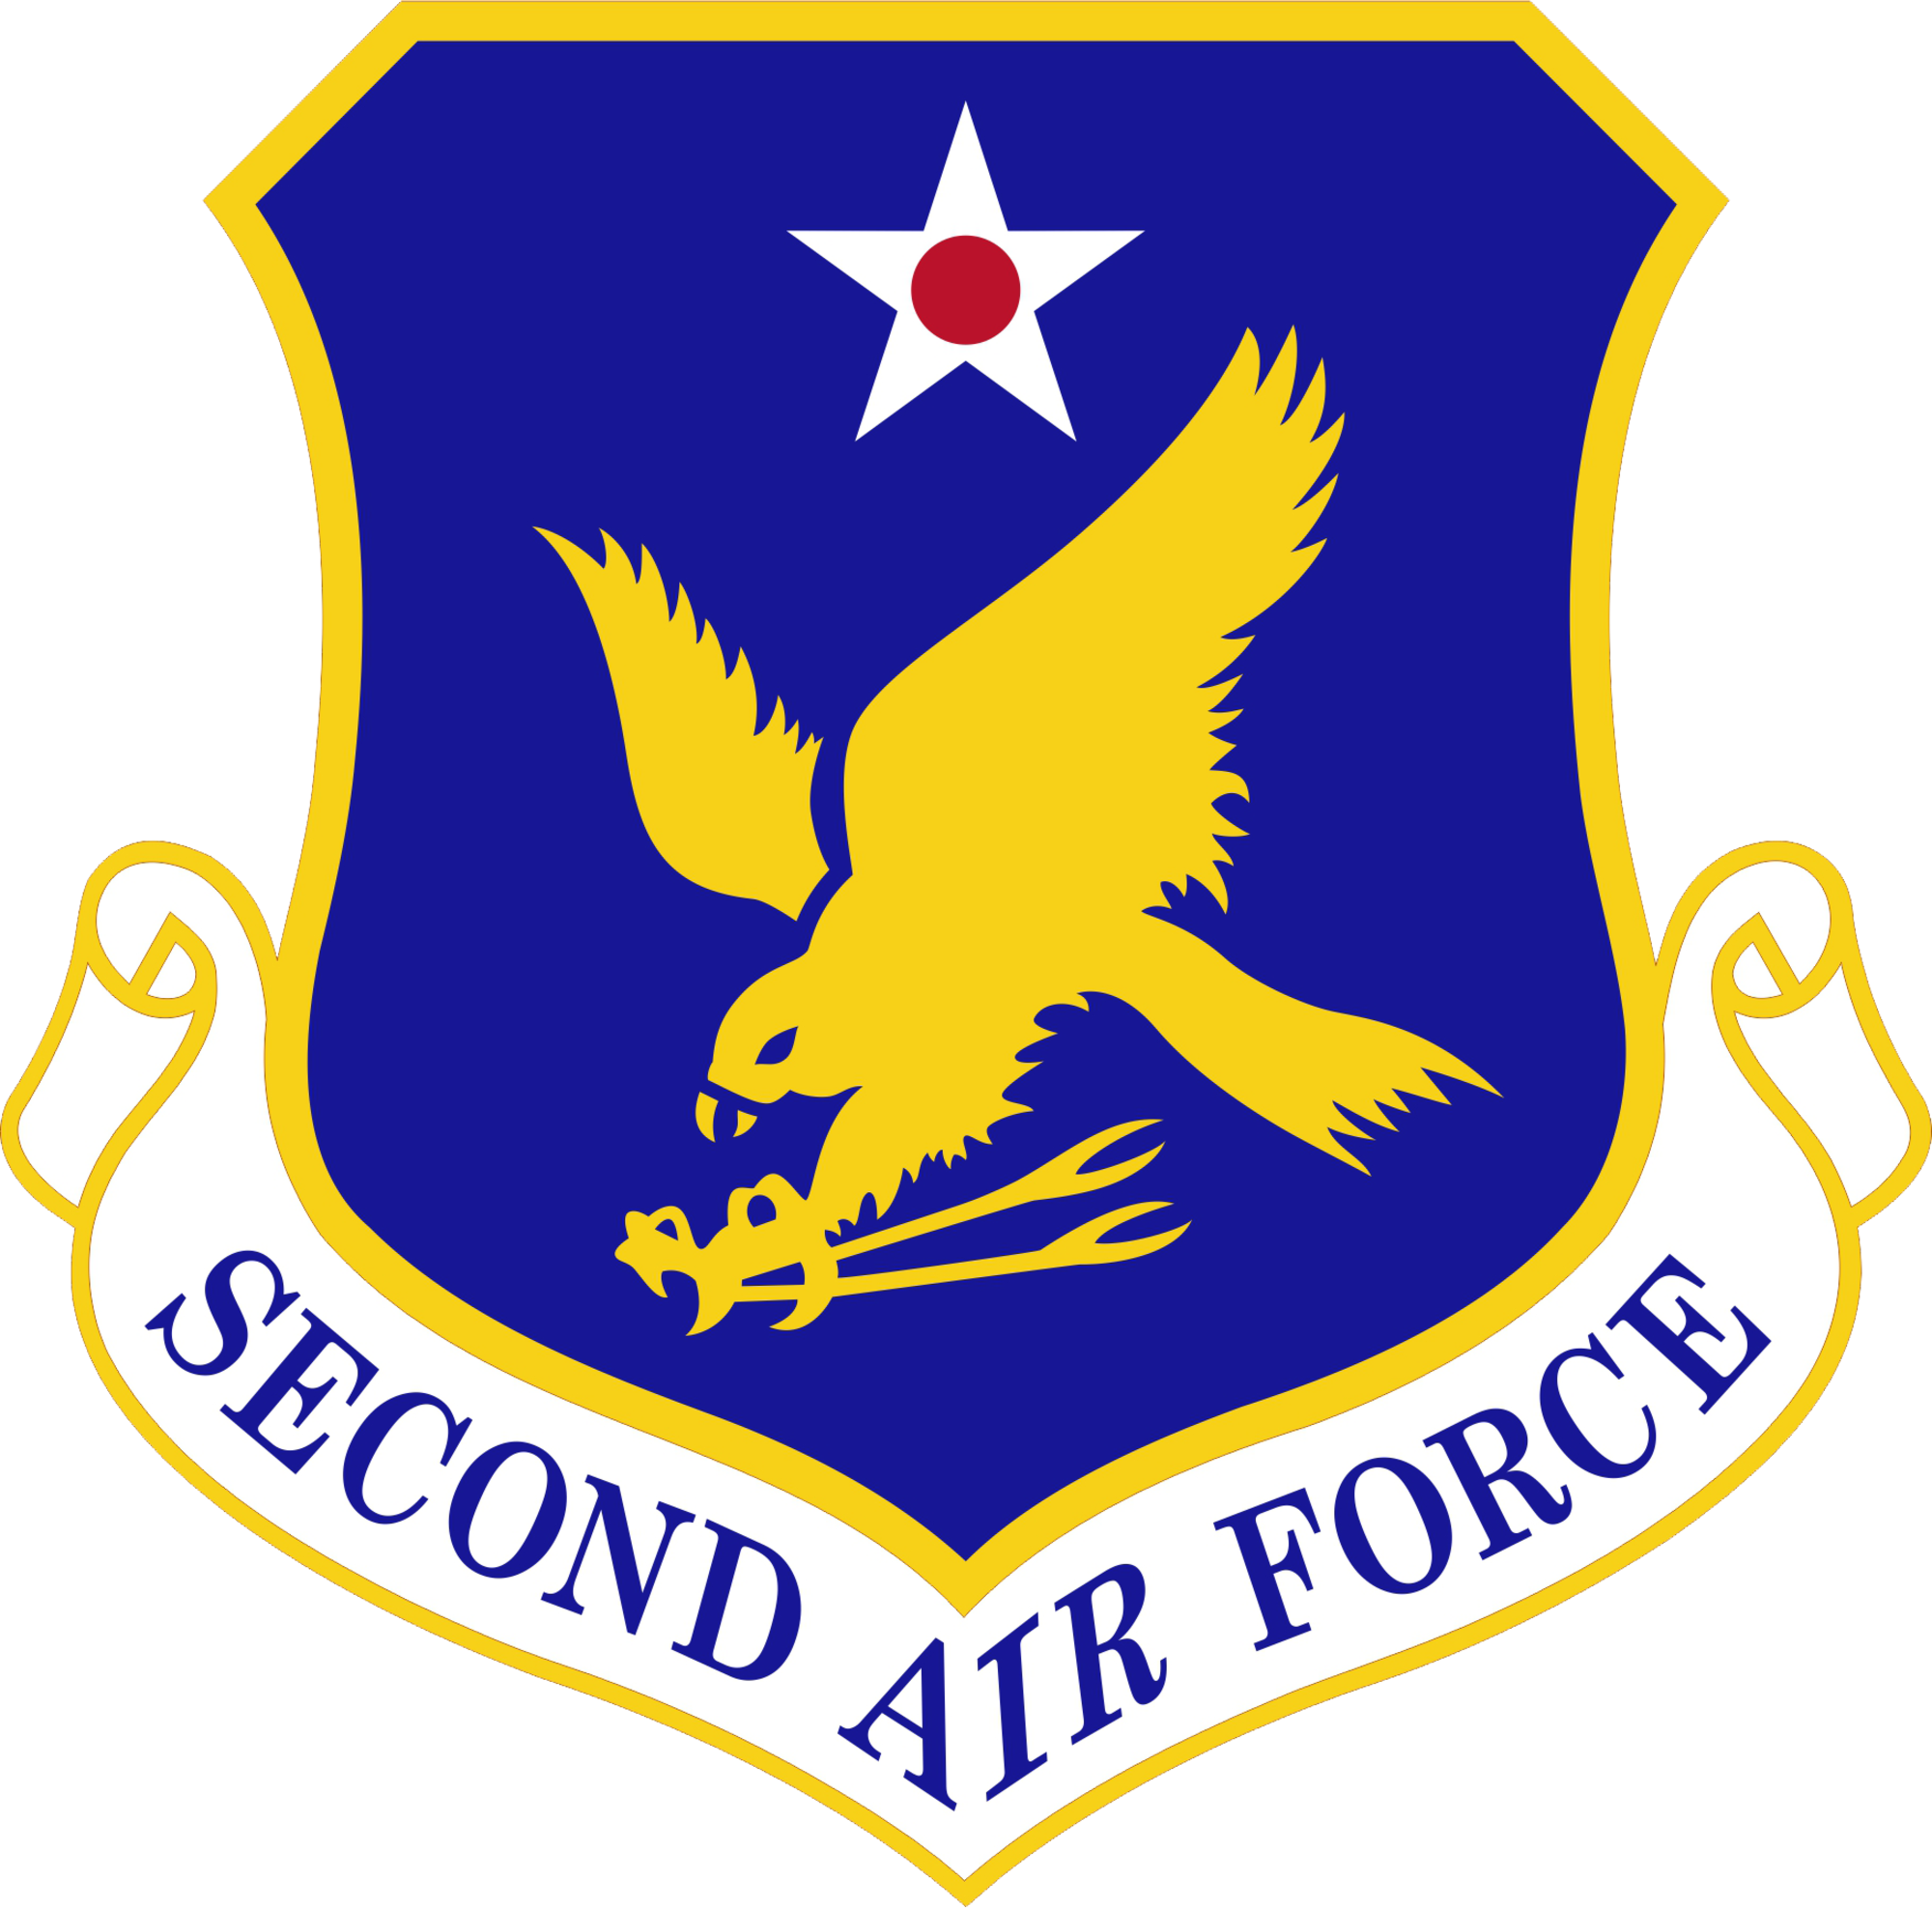 2nd Air Force logo. Caption reads: "The Second Air Force mission is to provide the best-trainined, combat-ready forces! To carry out this mission, Second Air Force manages all operational aspects of nearly 2,700 active training courses taught to approximately 150,000 students annually in technical training, basic military training, medical and distance learning courses. Training operations across Second Air Force range from intelligence to computer operations to space and missile operations and maintenance.

Courses are primarily taught at four resident training wings - Keesler; Goodfellow, Lackland and Sheppard Air Force Bases, Texas; and a training group located at Vandenberg AFB, California. Aside from the resident bases, Second Air Force operates 92 training detachments around the world, which provide advanced aircraft maintenance continuation training.

Headquarters Second Air Force accomplishes its mission through the work in four main arenas: Joint Expeditionary Tasking, Mission Support, Staff Judge Advocate and Safety."